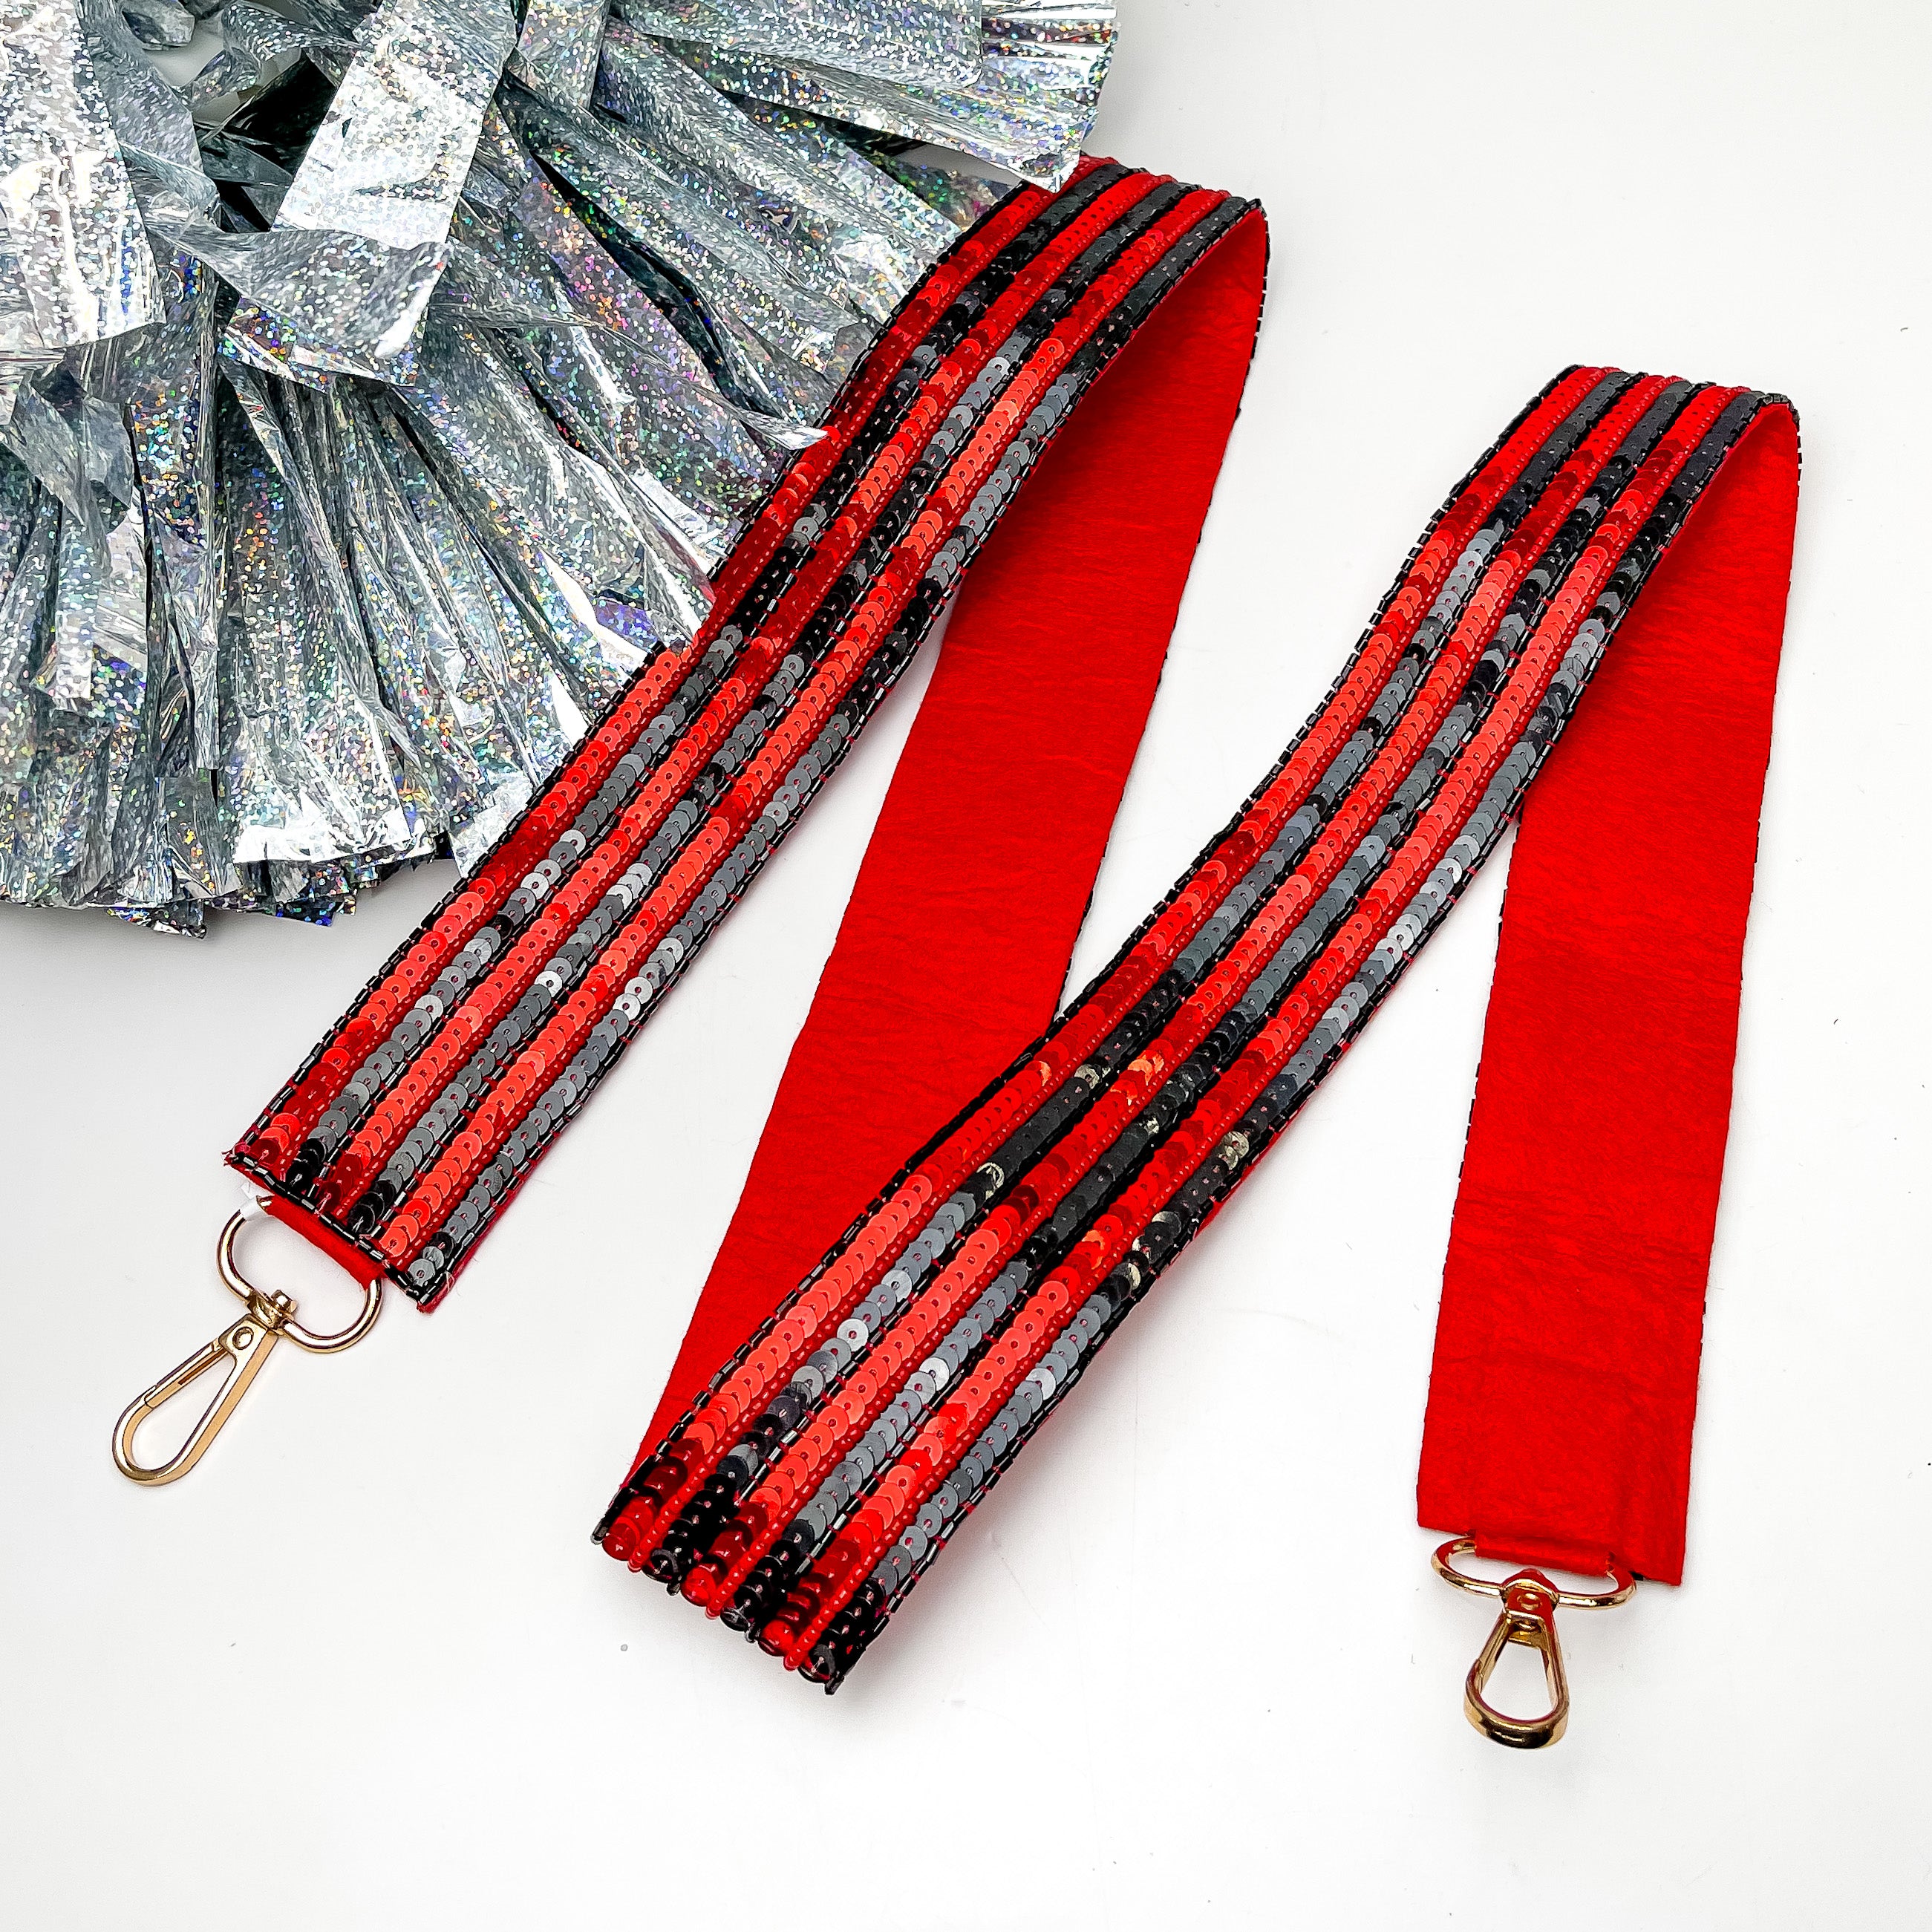 Game Day! Striped Beaded Purse Strap in Red and Black. This purse strap is pictured on a white background with a silver pom pom next to it.